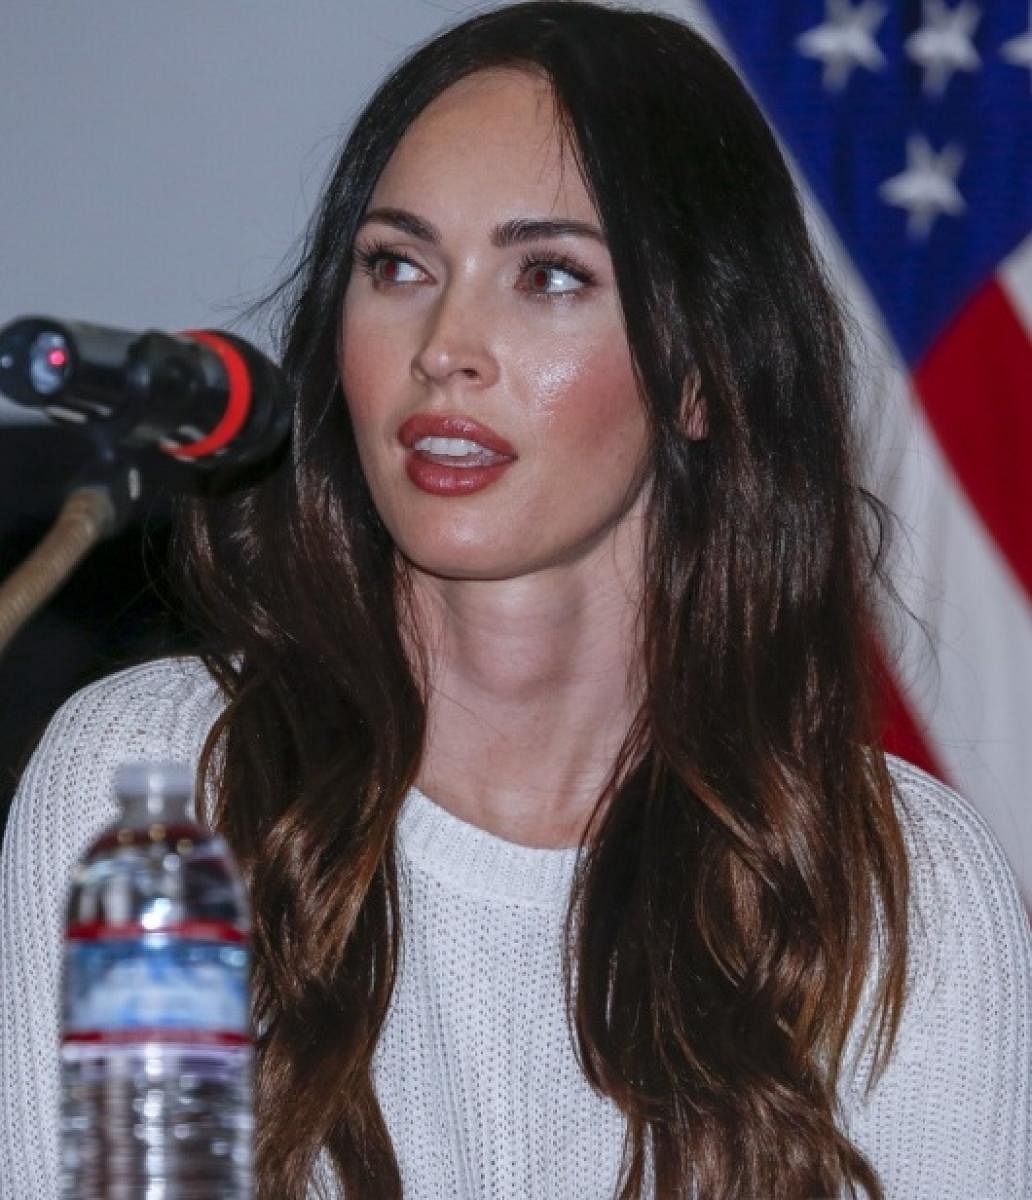 Megan Fox will be playing an FBI agent in her next. (Credit:Wikimedia Commons)